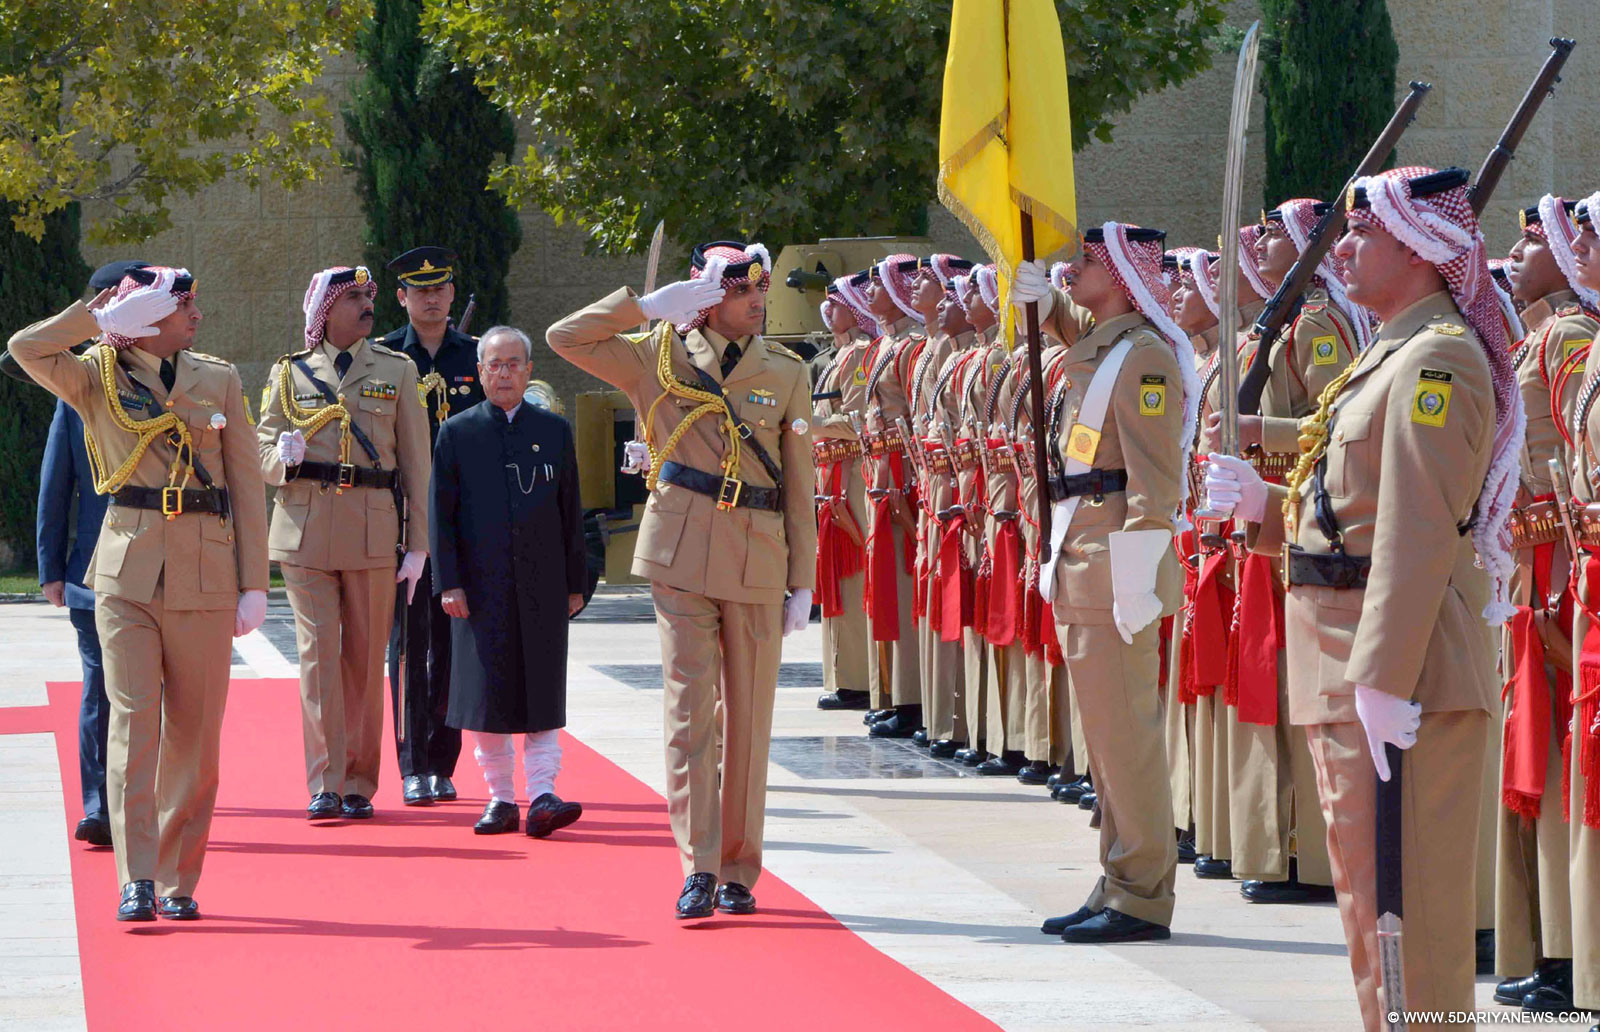 The President, Shri Pranab Mukherjee inspecting the Guard of Honour, at the Ceremonial Reception, at Al Husseinieh Palace, in Amman, Jordan on October 10, 2015. 